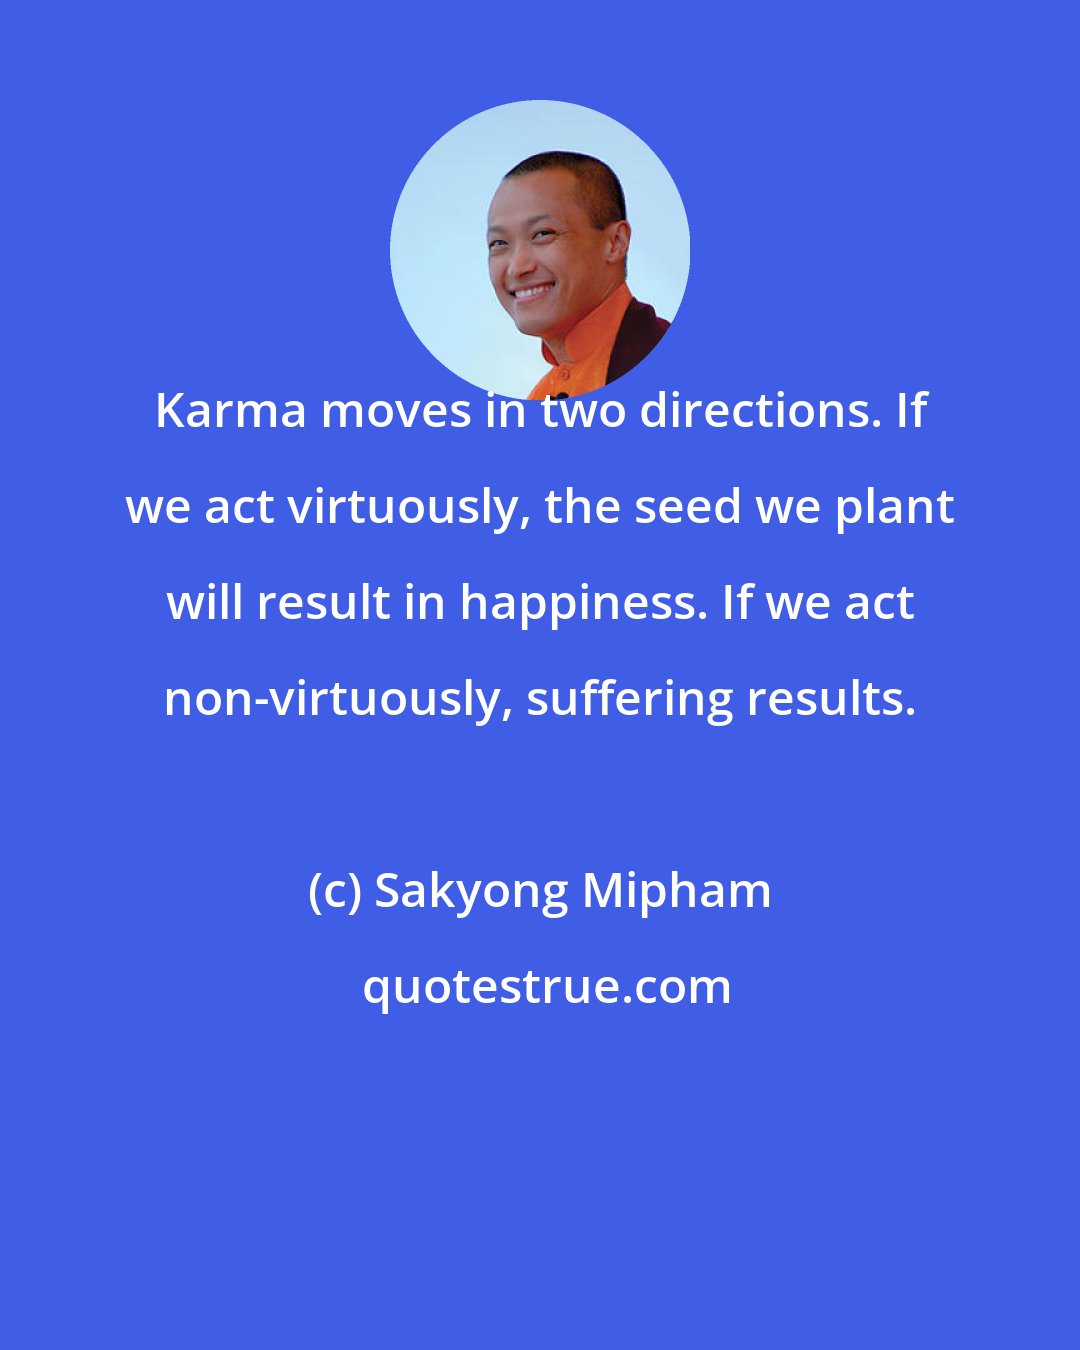 Sakyong Mipham: Karma moves in two directions. If we act virtuously, the seed we plant will result in happiness. If we act non-virtuously, suffering results.